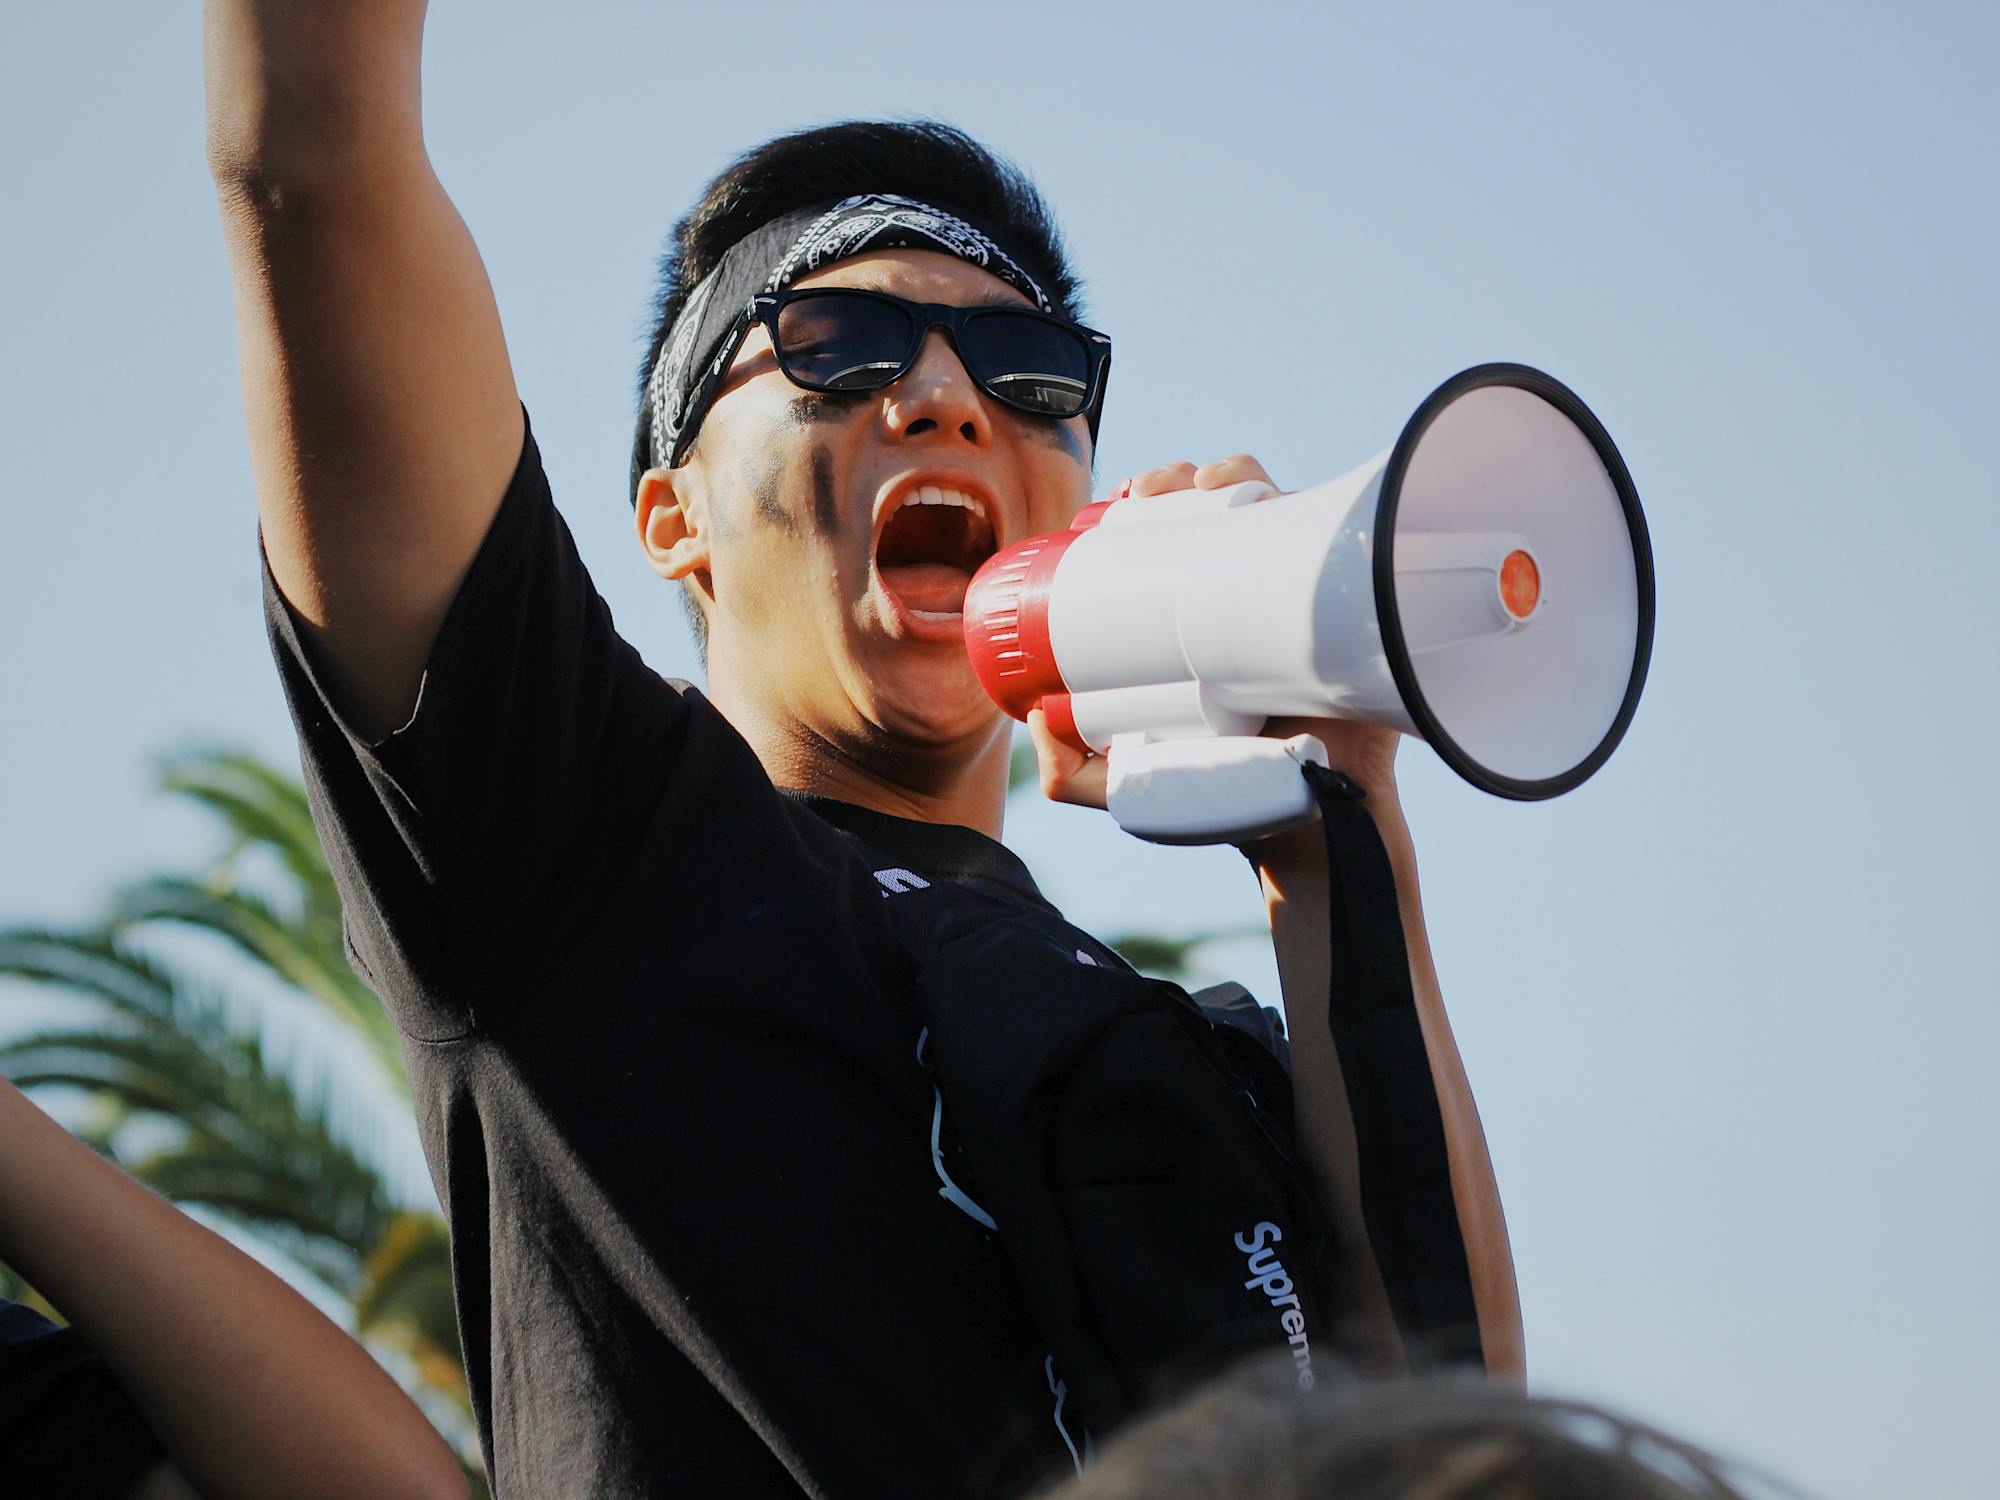 A young man throws his arm into the air as he hollers into a megaphone